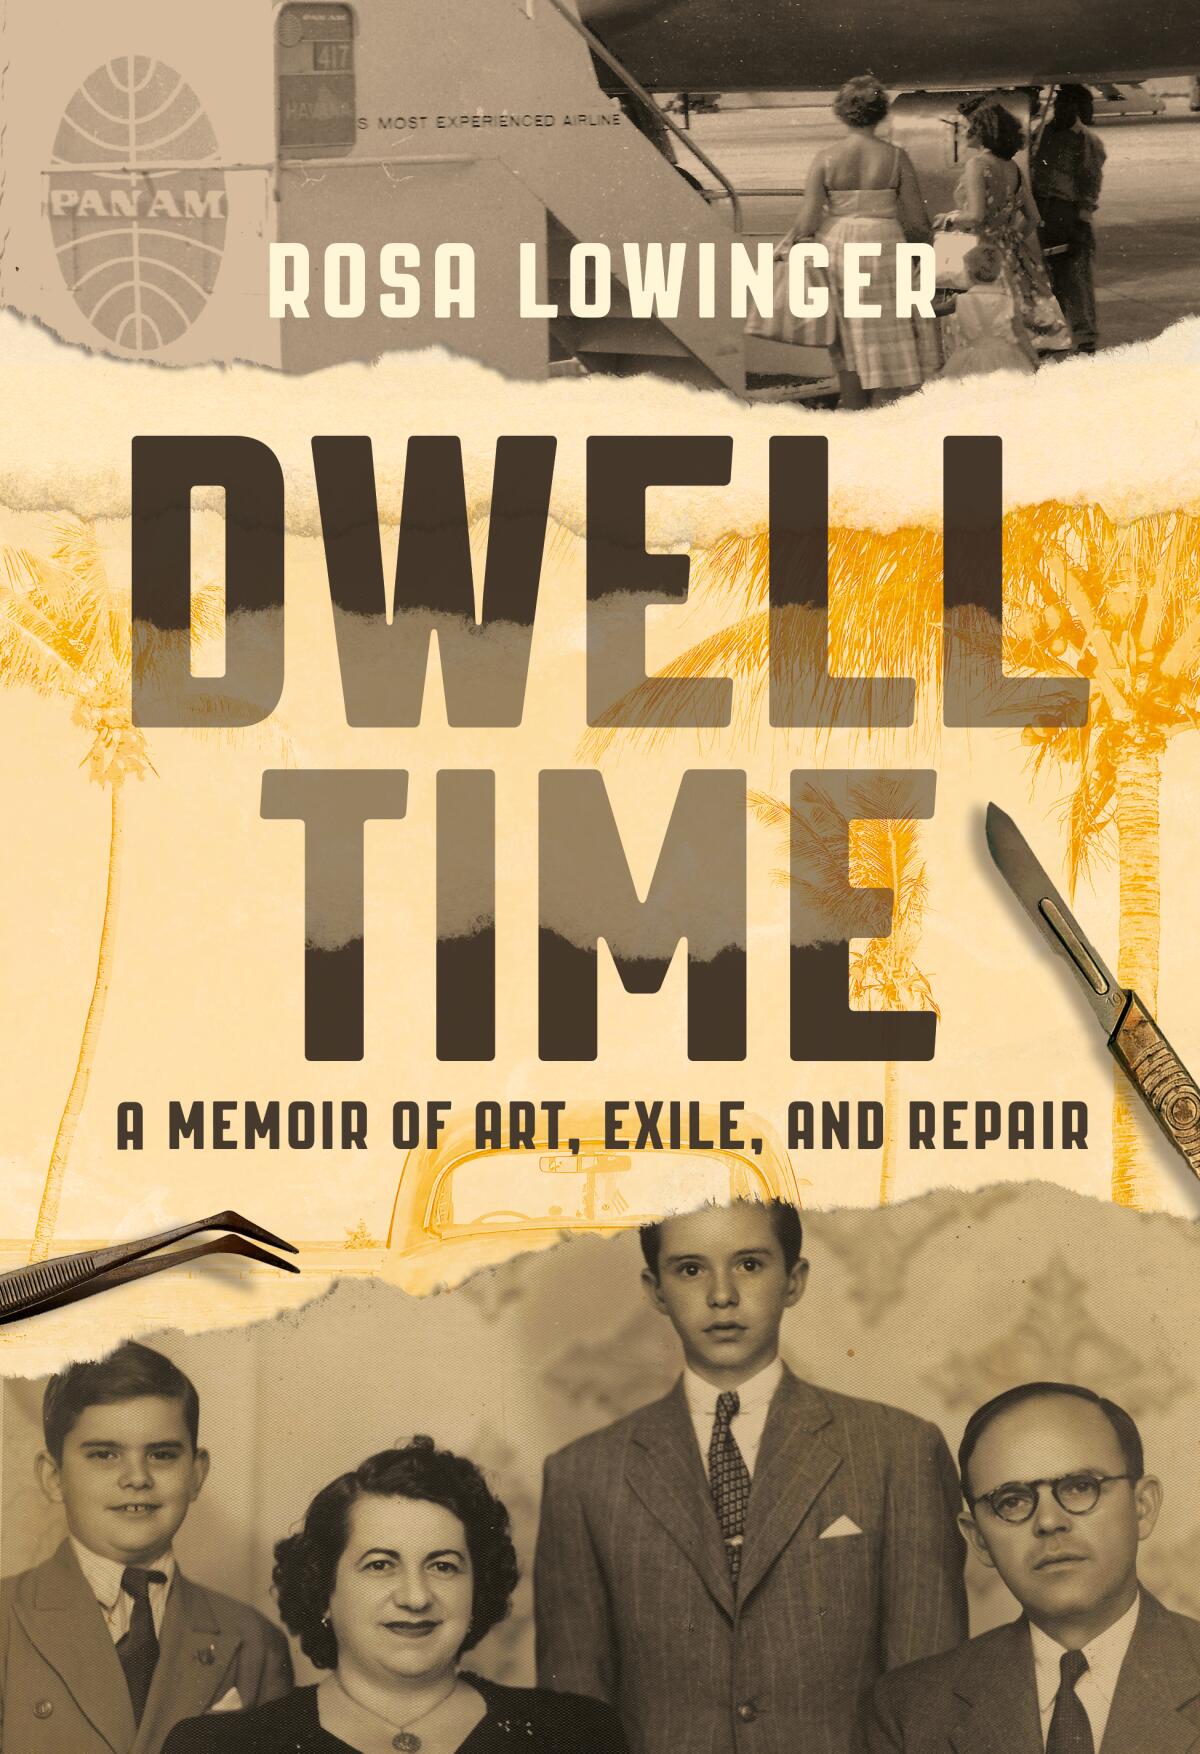 "Dwell Time," by Rosa Lowinger.